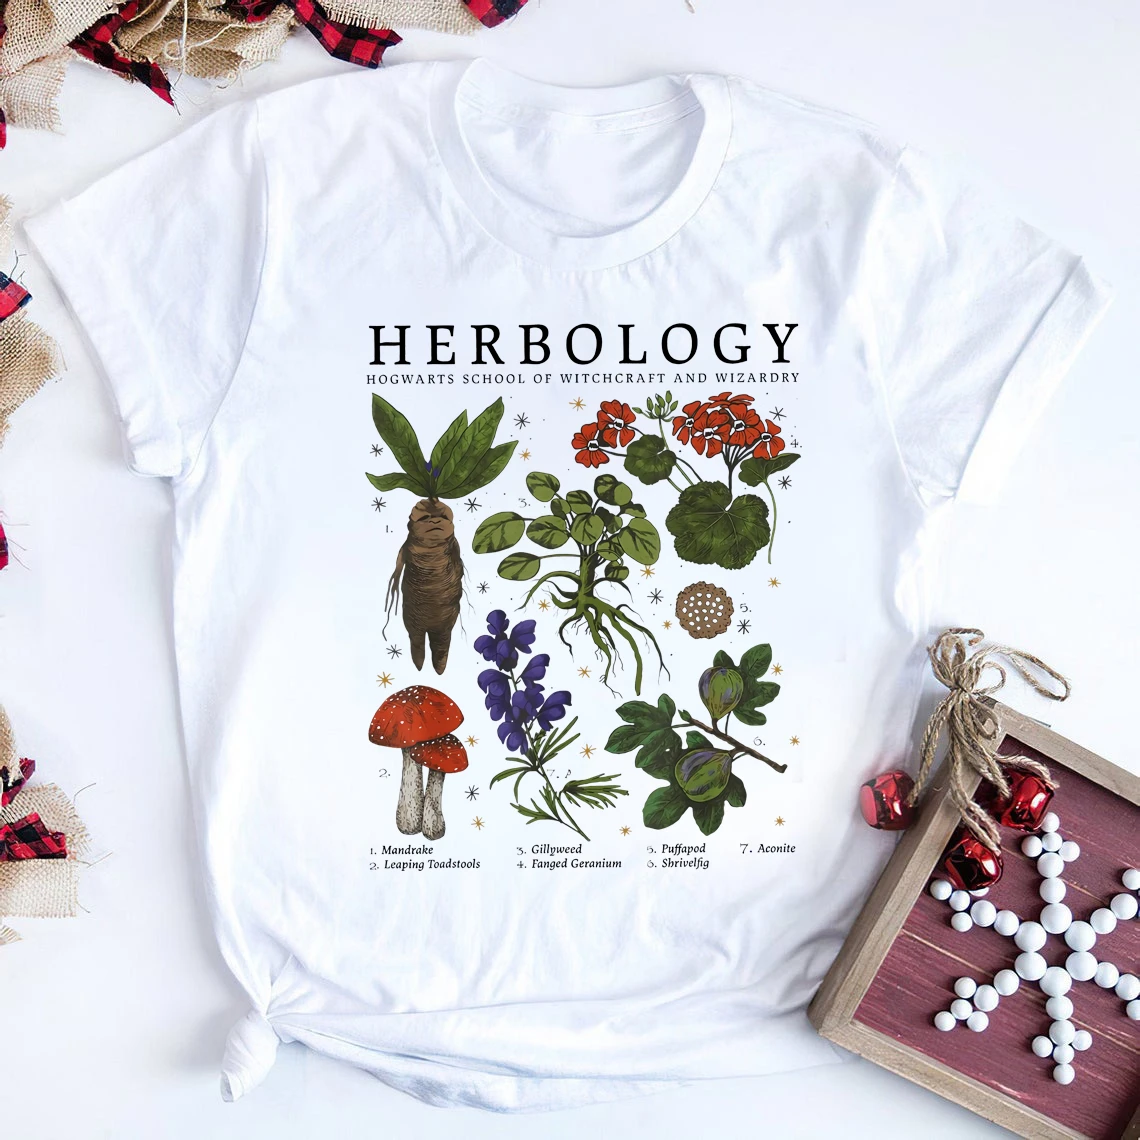 Herbology Plants T-Shirt HP Inspired Hogwarts School Herbology Shirt Magical Wizard Tee Gift for HP Fans graphic tees women Tees